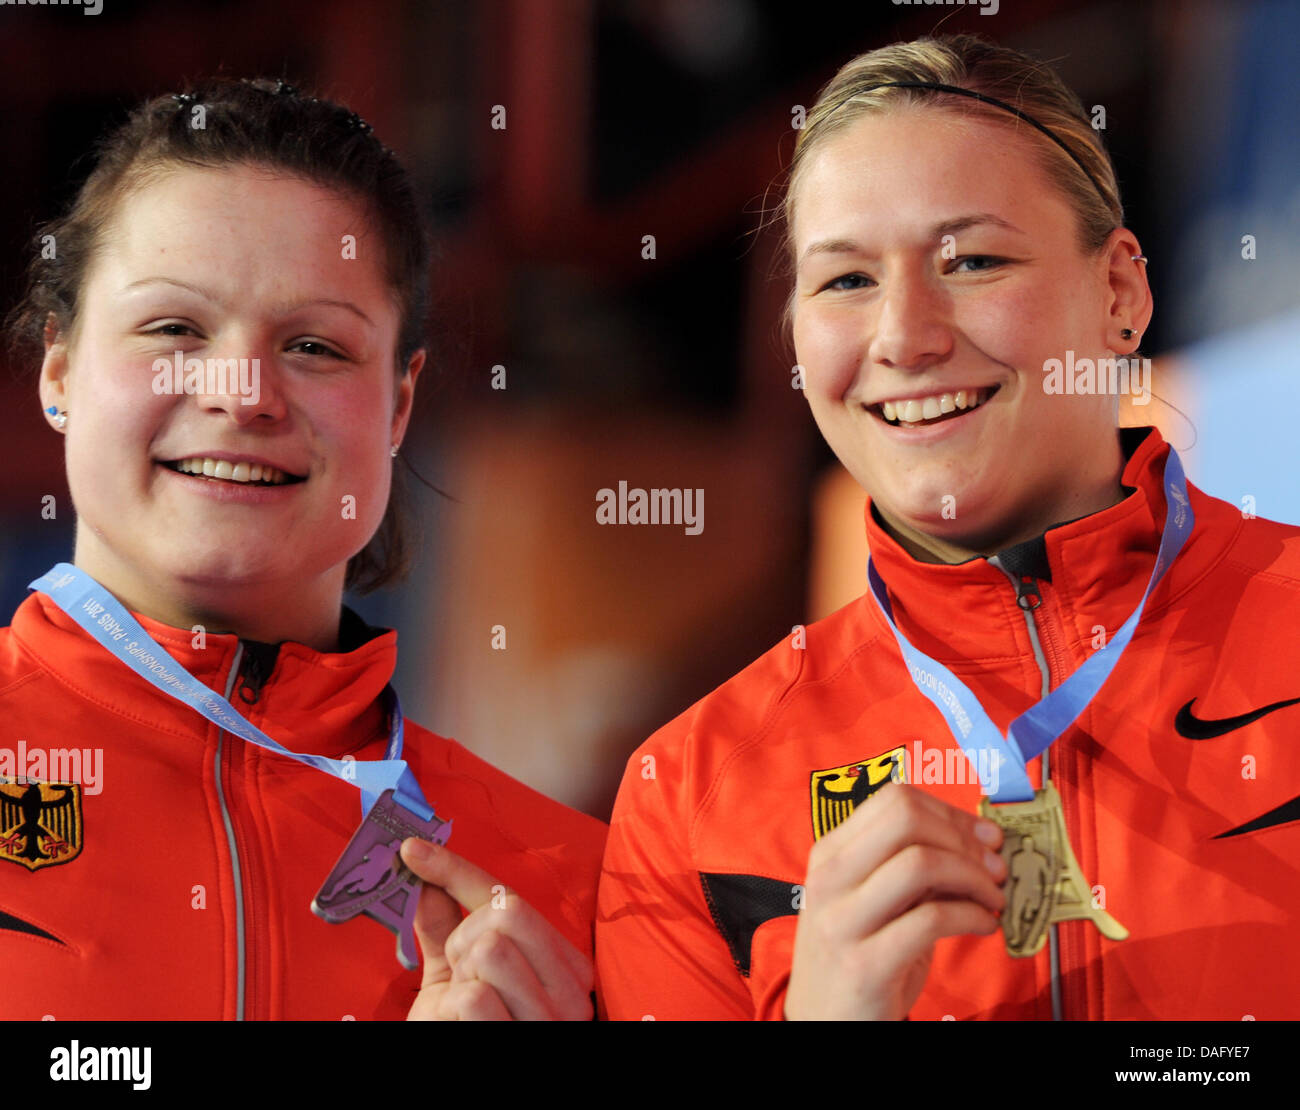 (L-R) Germany's Christina Schwanitz (silver) and Germany's Josephine Terlecki (bronze) smile with their medals won in the shotput competition at the European Athletics Indoor Championships 2011 in Paris, France, 05 March 2011. Photo: Arne Dedert Stock Photo